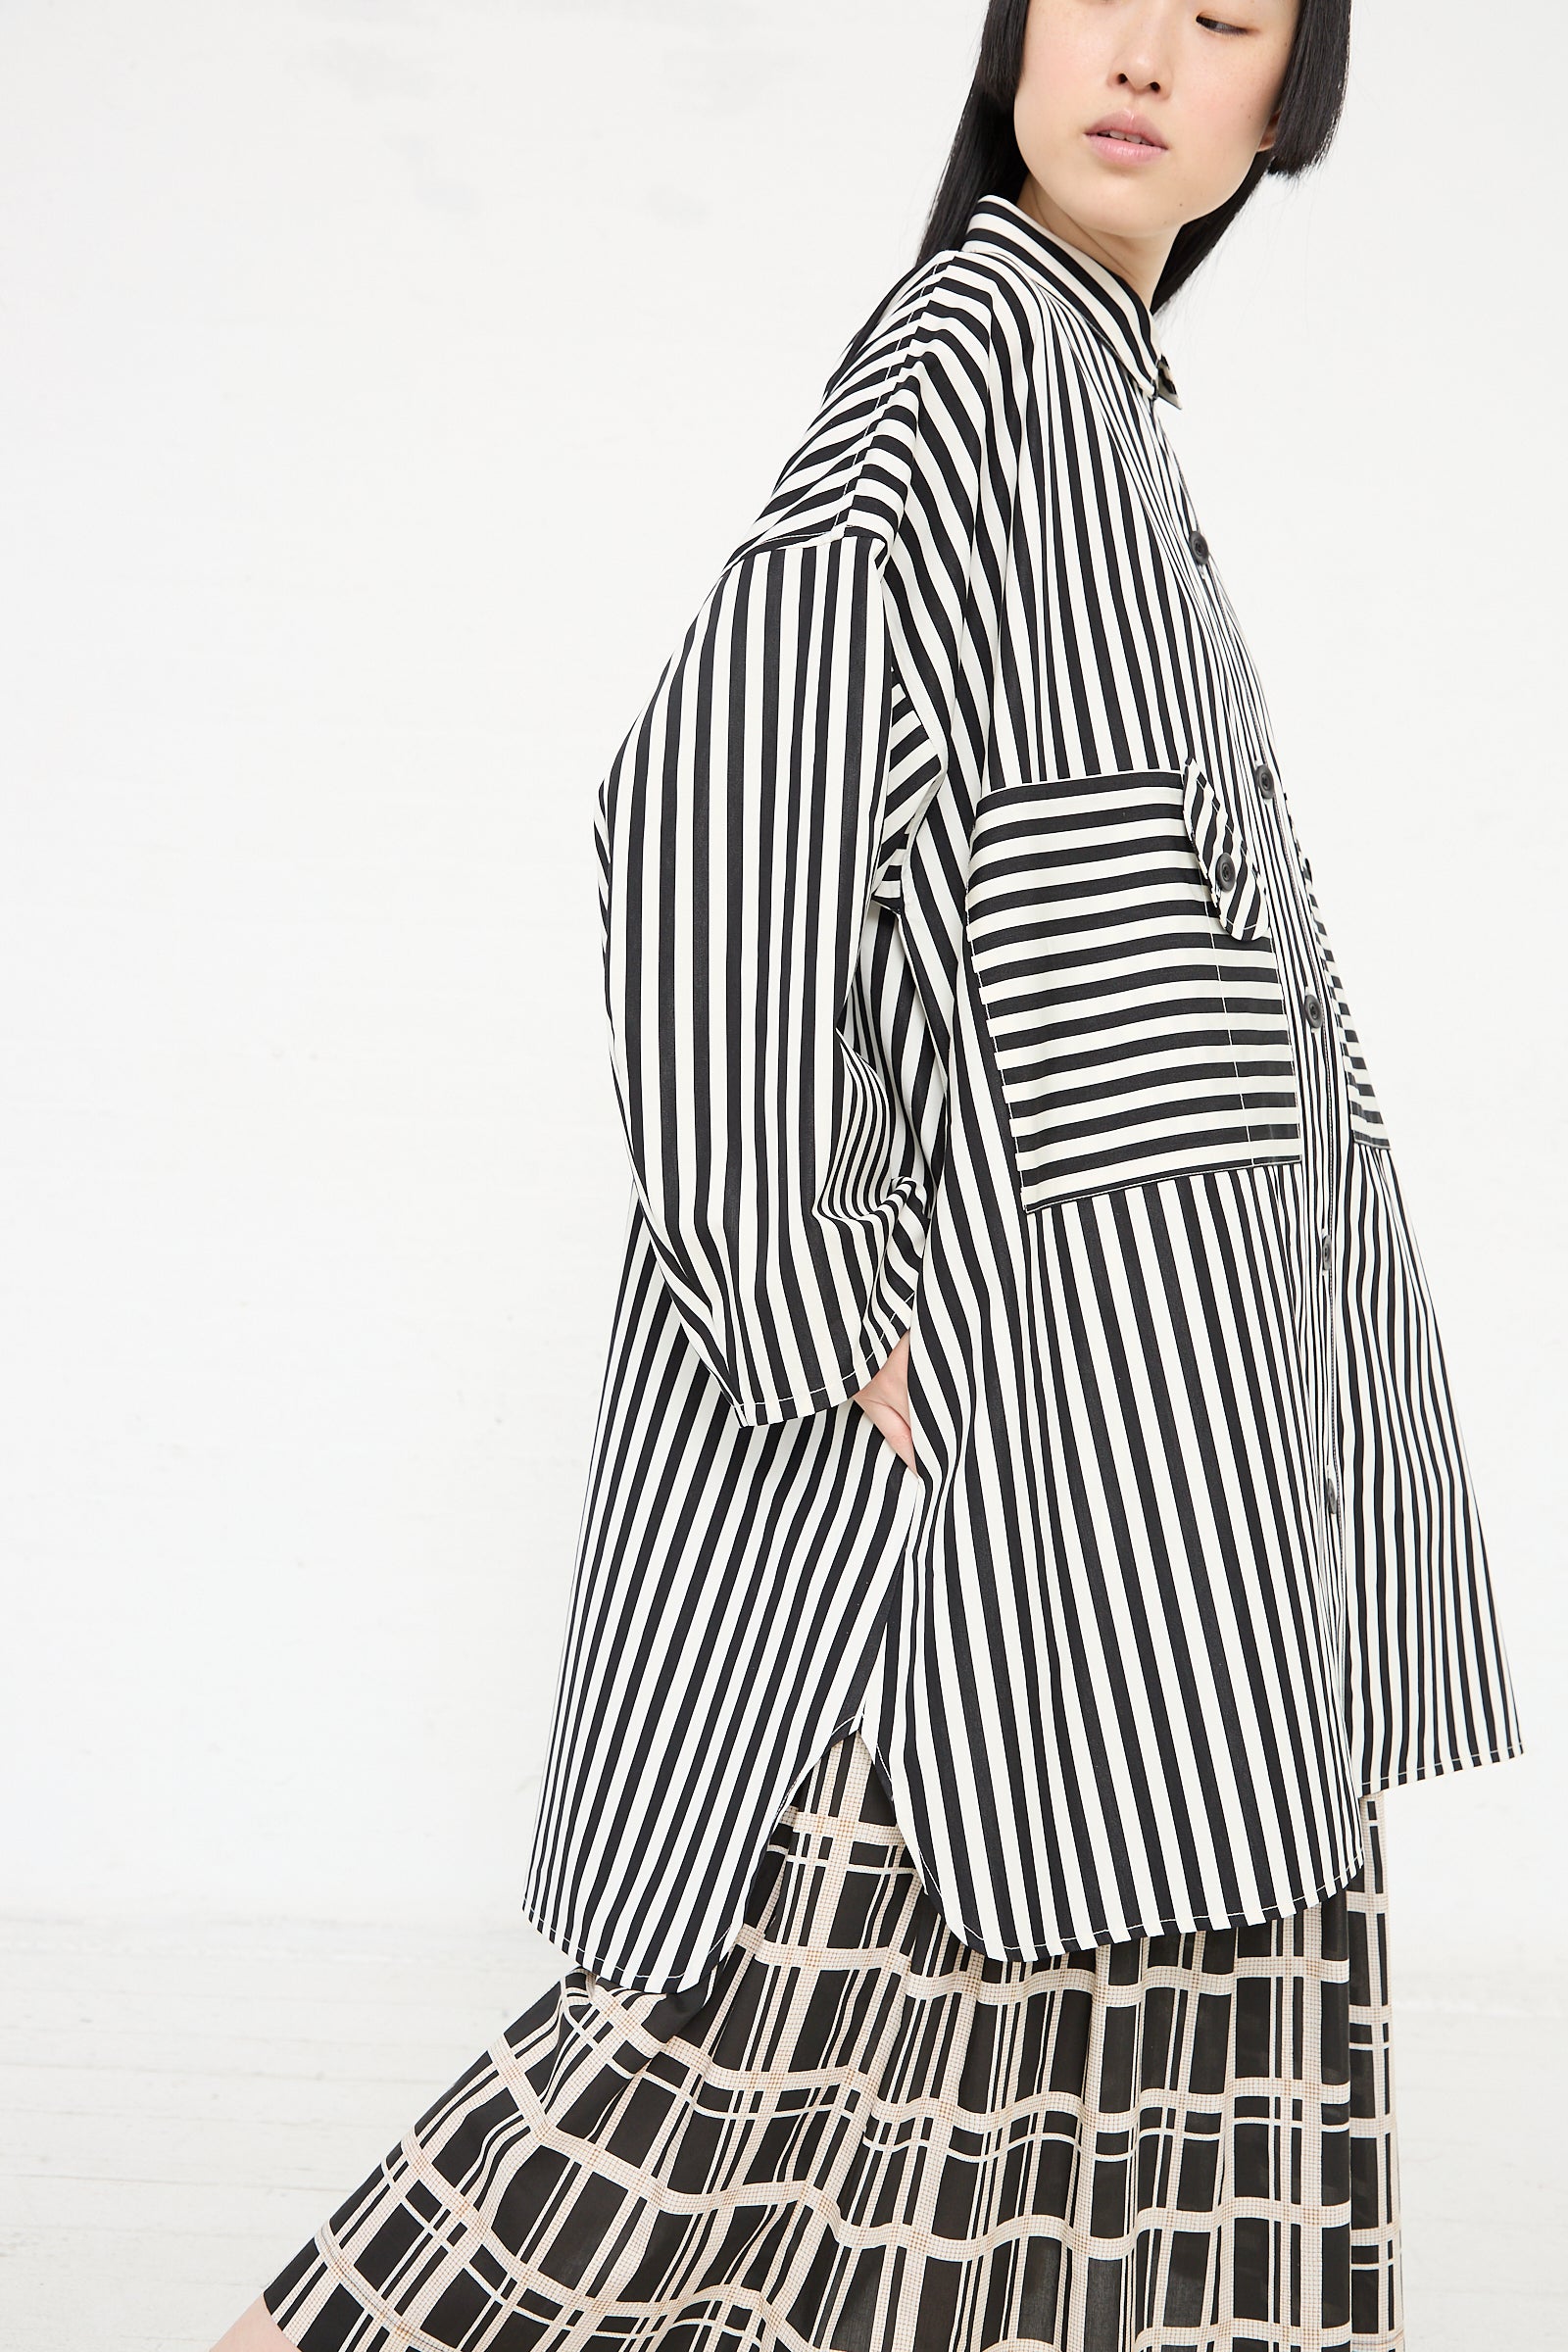 A person wearing a KasMaria Cotton Poplin Oversized Smock Dress in Stripe with black and white stripes and a relaxed fit, showcasing a modern design against a white background.